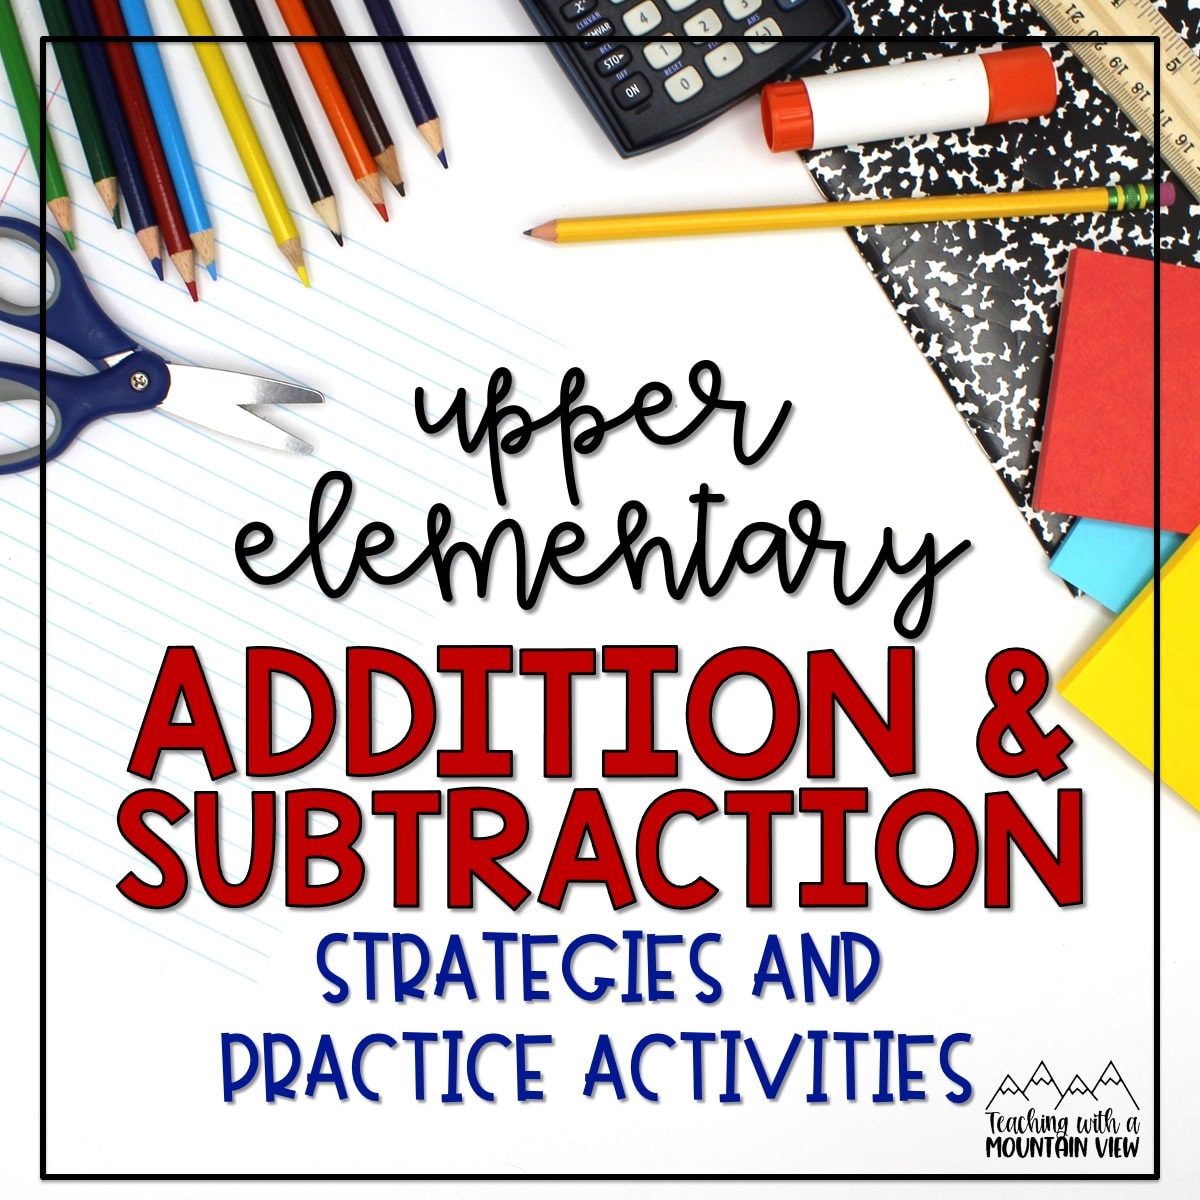 Learn how to give students a solid conceptual understanding of addition and subtraction strategies in upper elementary.